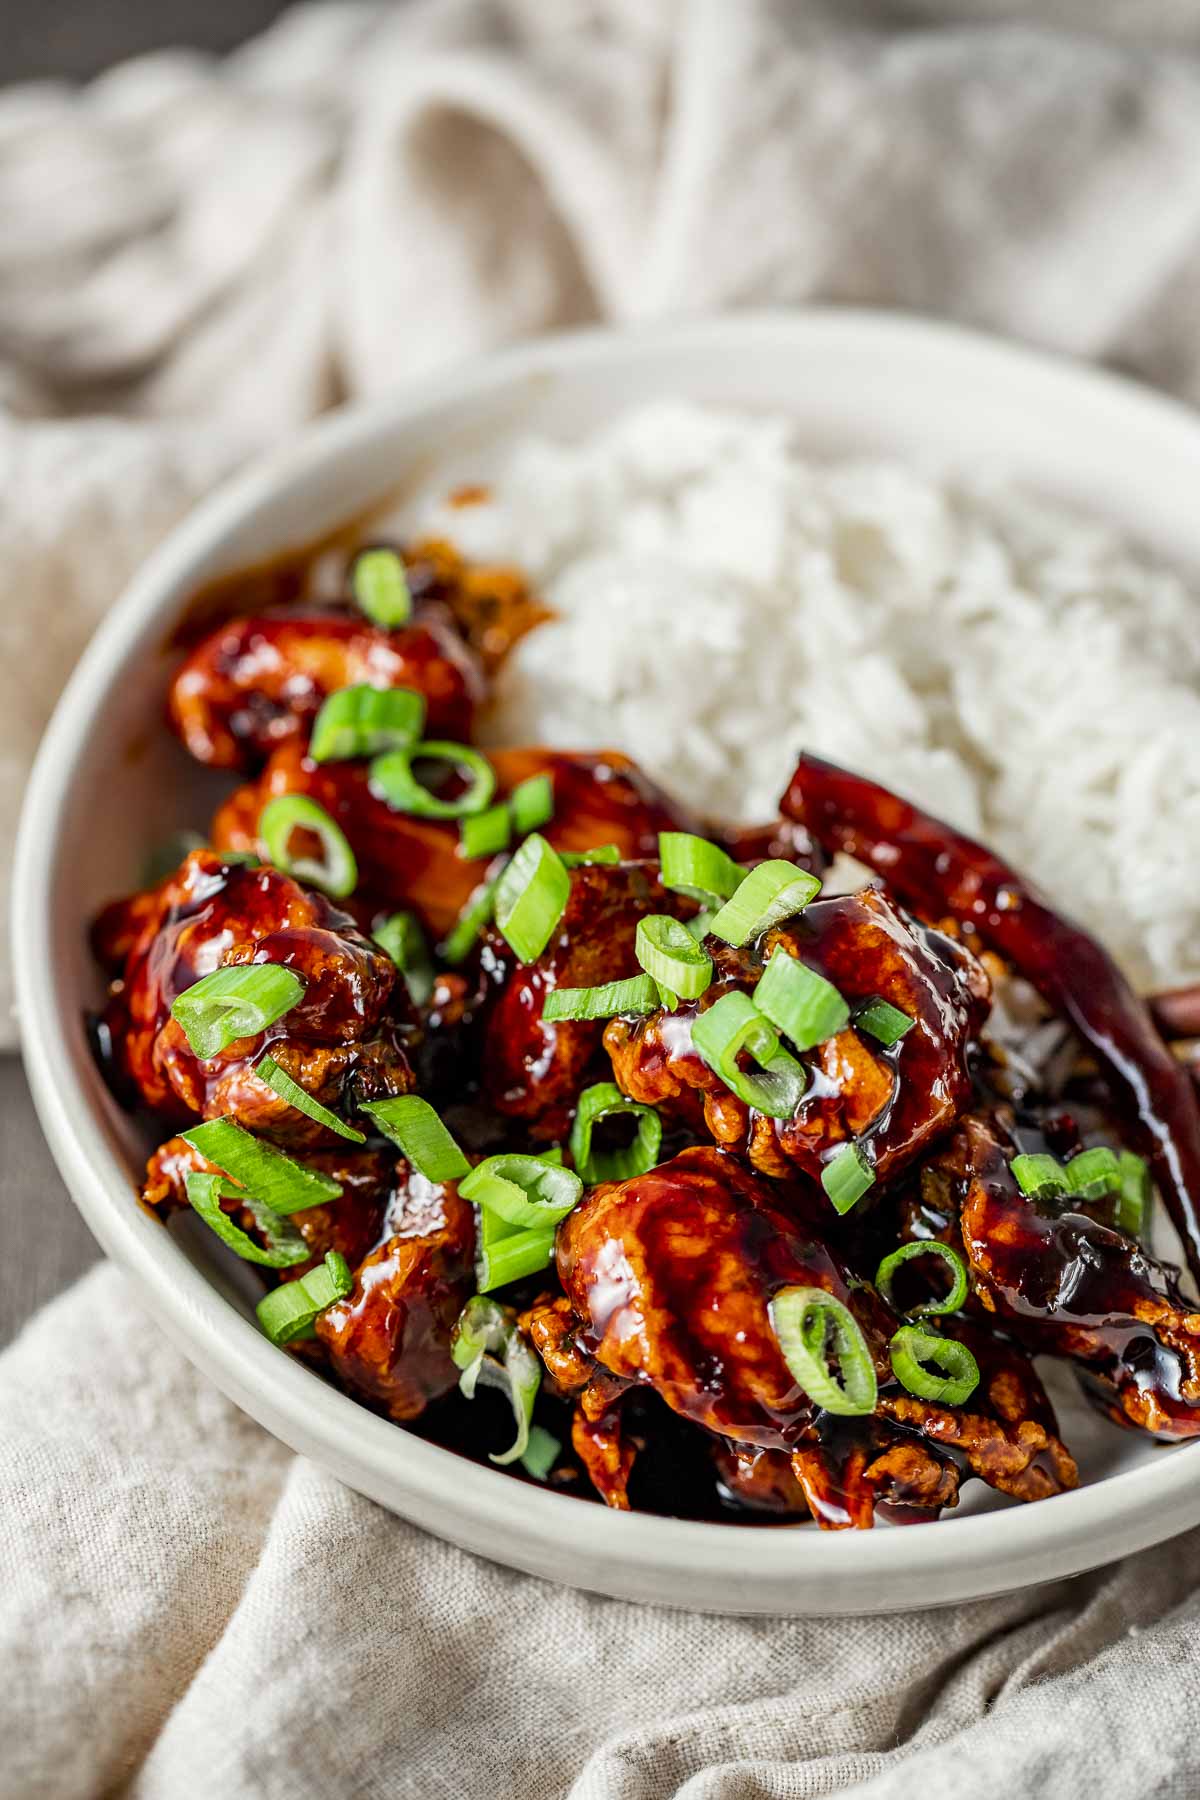 Side view of general tso's chicken with rice in a white bowl.